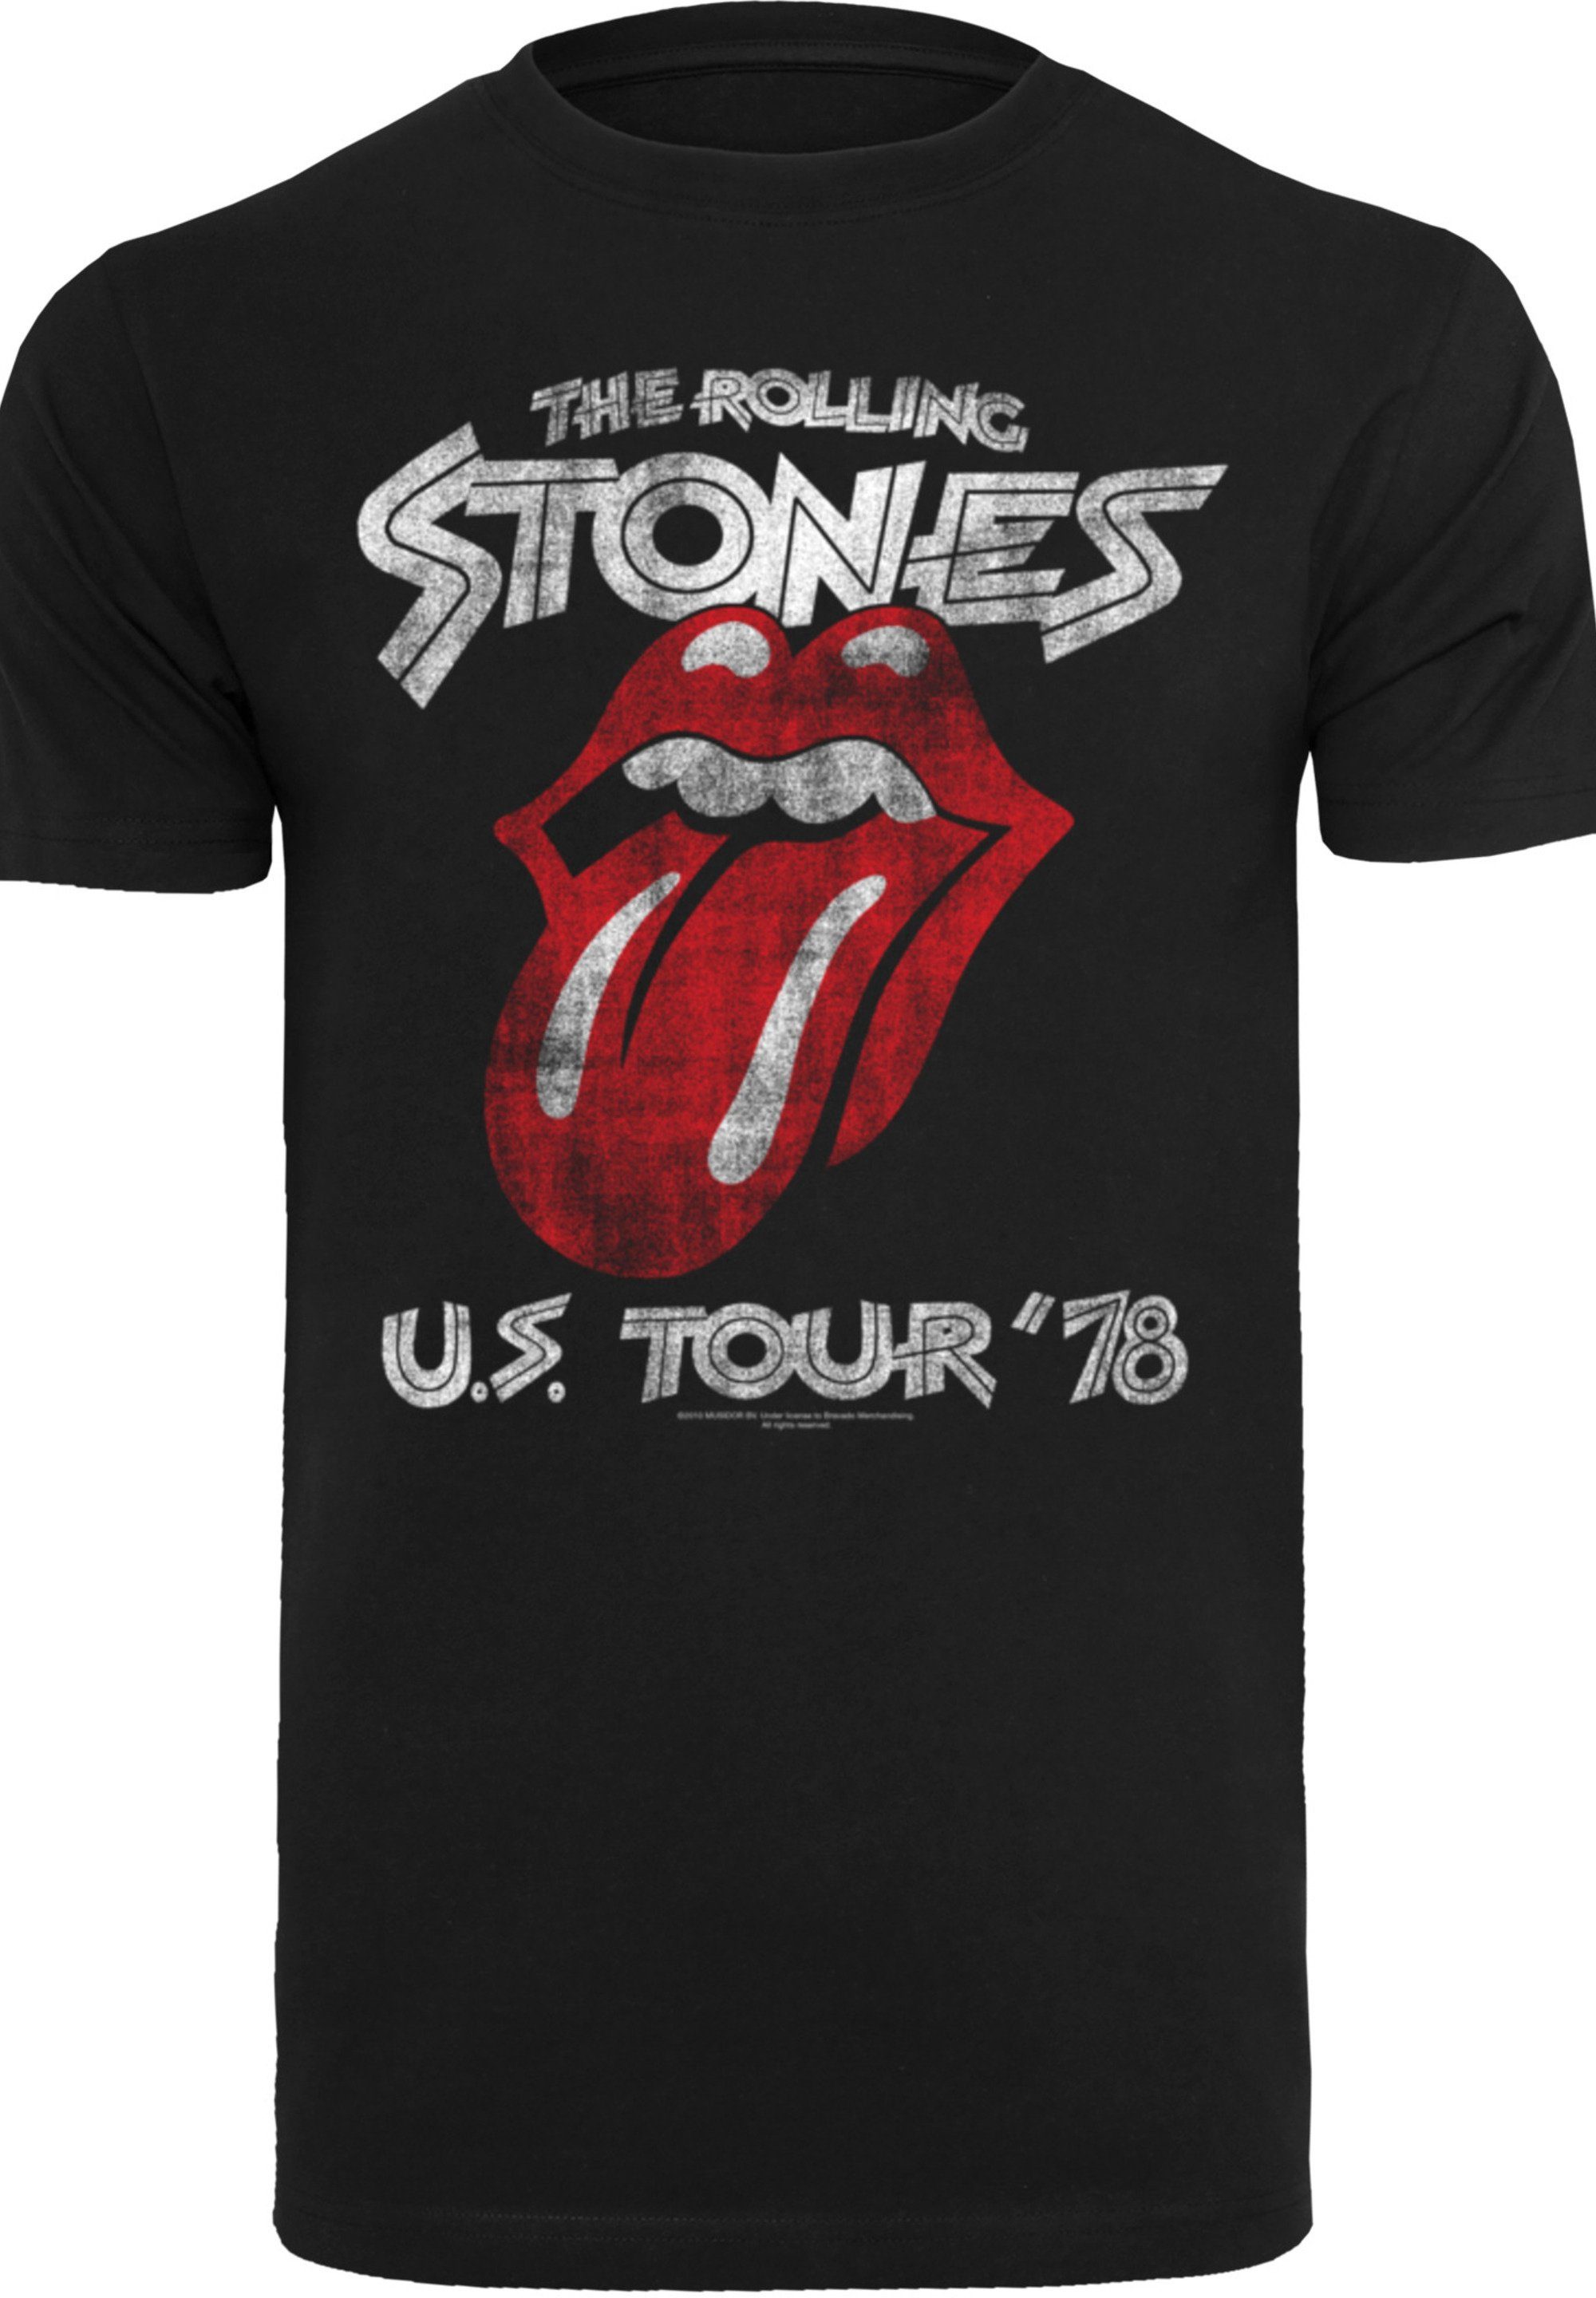 The Rock Print US Tour F4NT4STIC T-Shirt Band Stones Rolling '78 Front